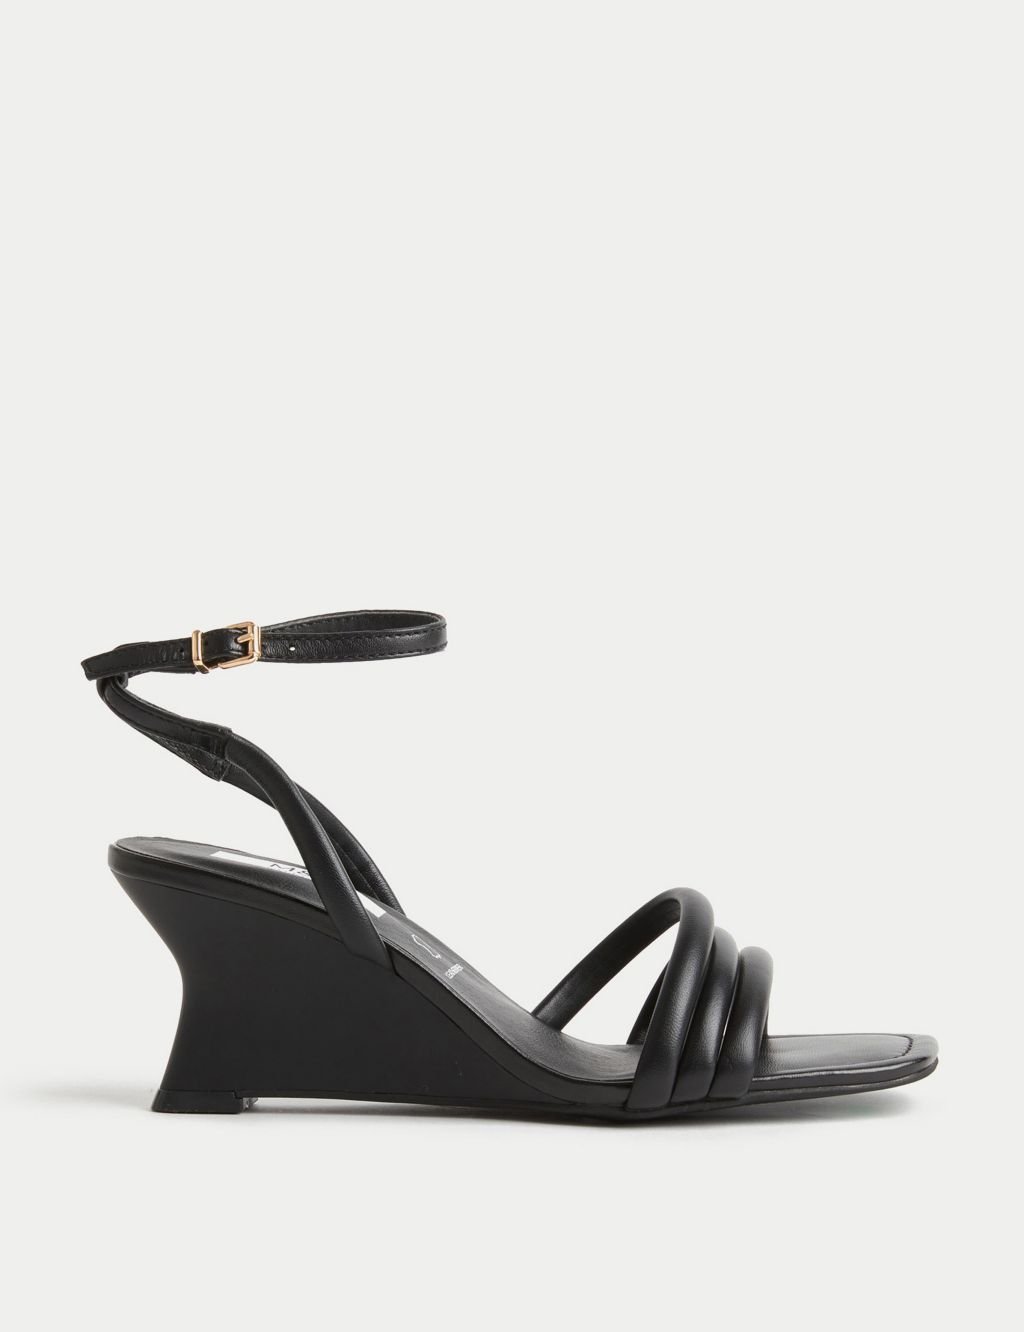 Buckle Strappy Wedge Sandals image 1